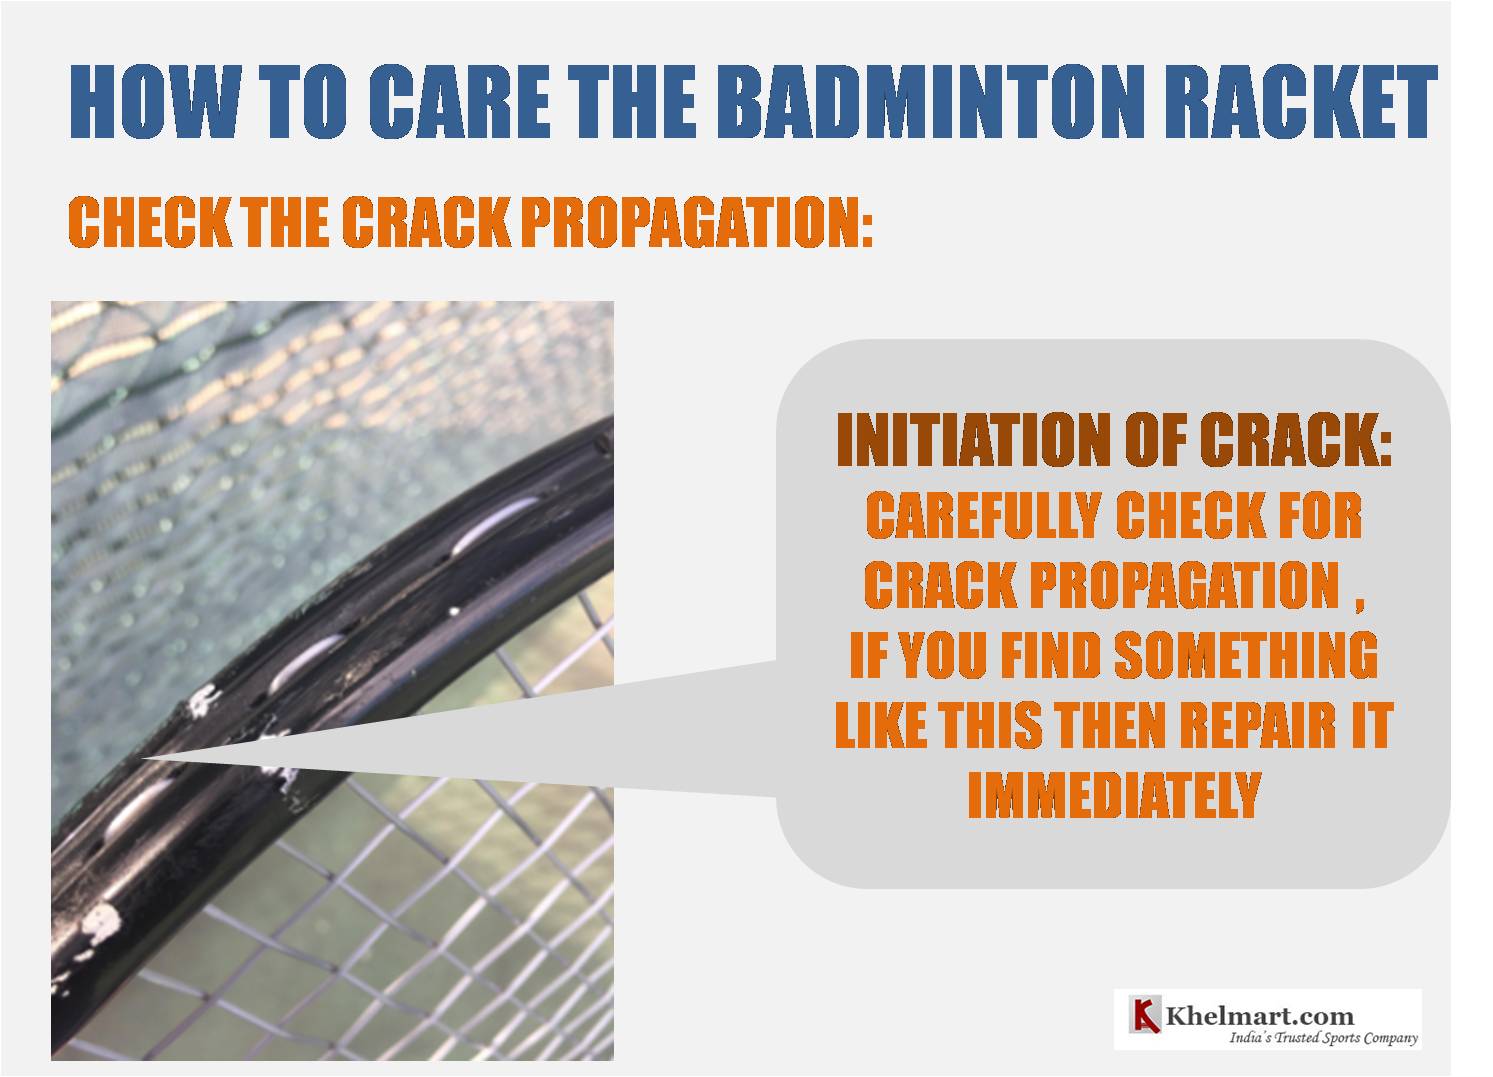 How_to_take_care_of_badminton_racket_Crack_Care_khelmart_Guide